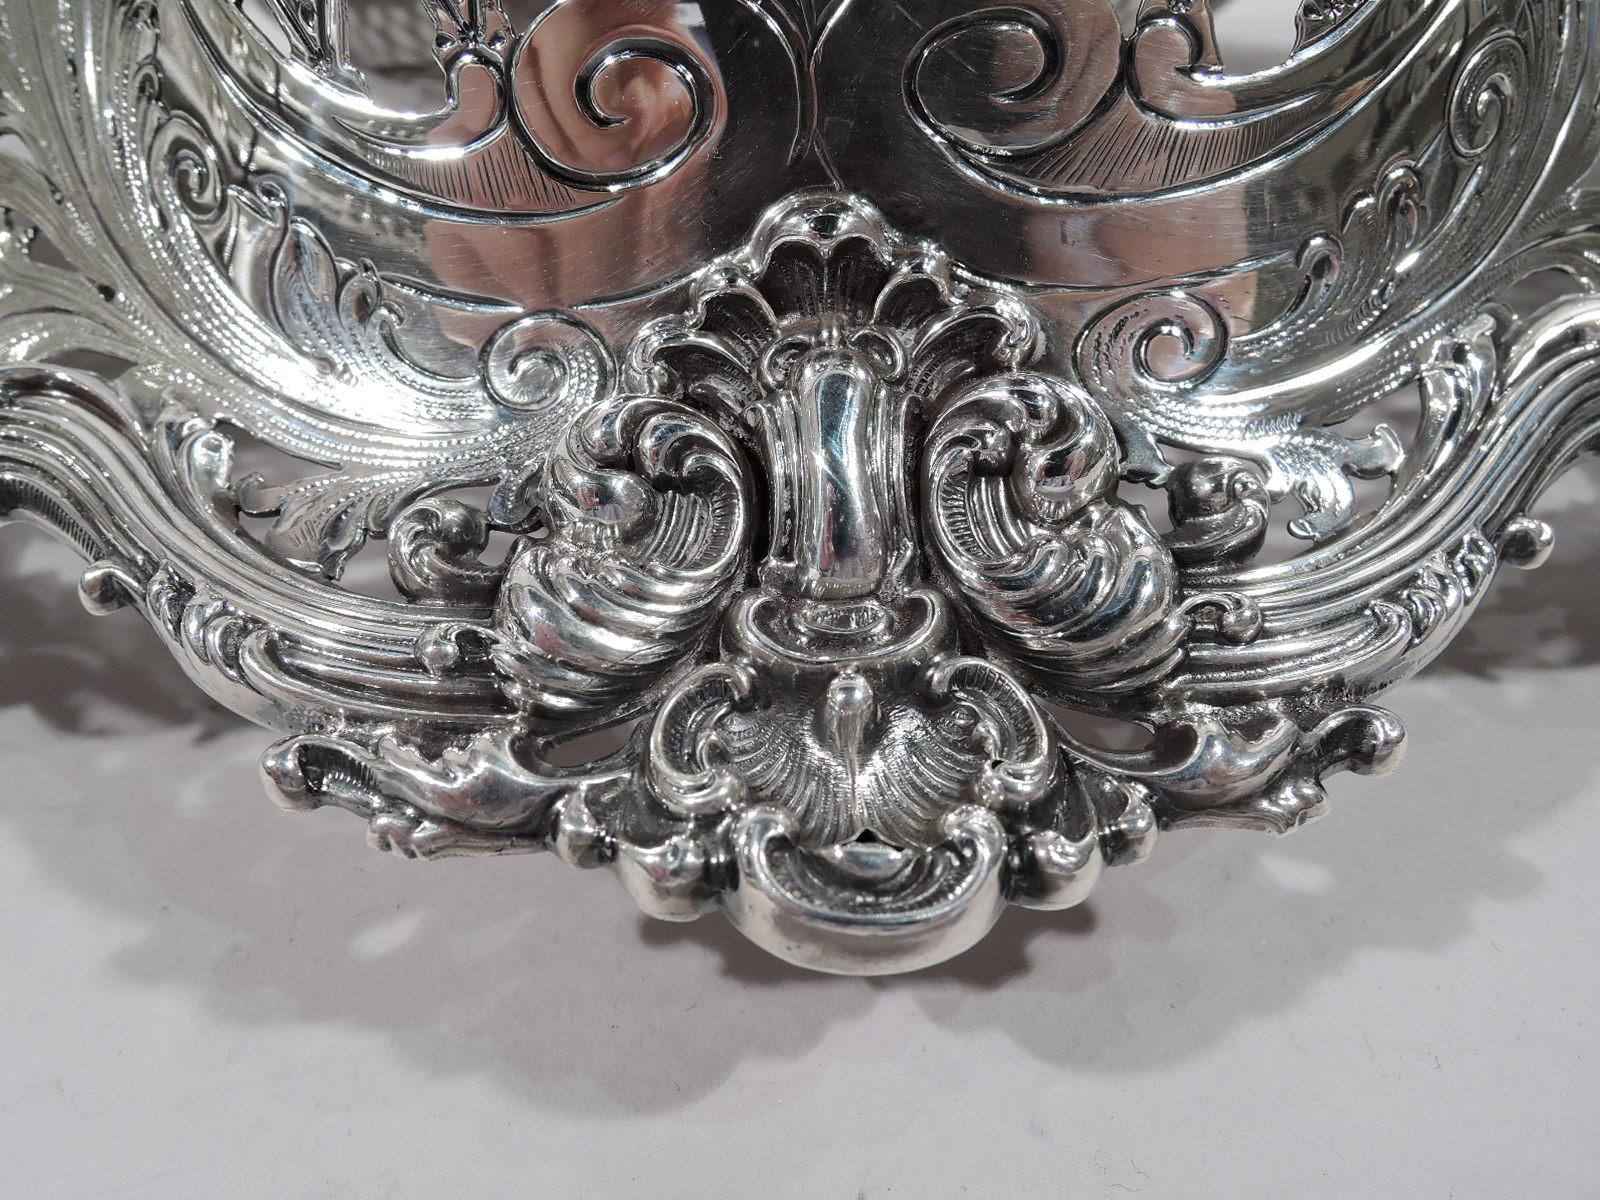 19th Century American Gilded Age Sterling Silver Centerpiece Bowl by Redlich